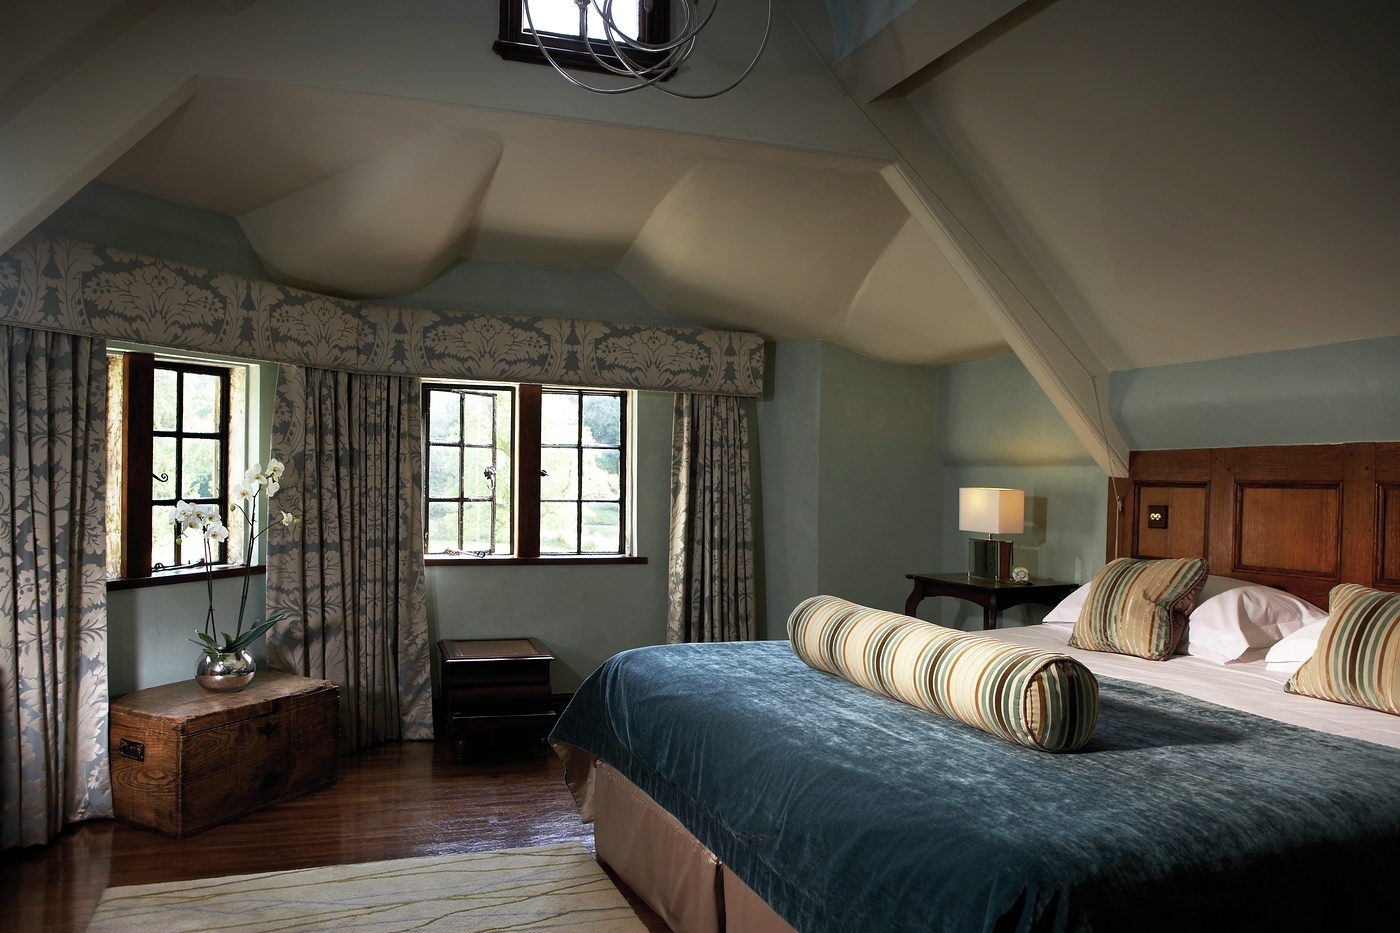 The Manor House Hotel Bedroom